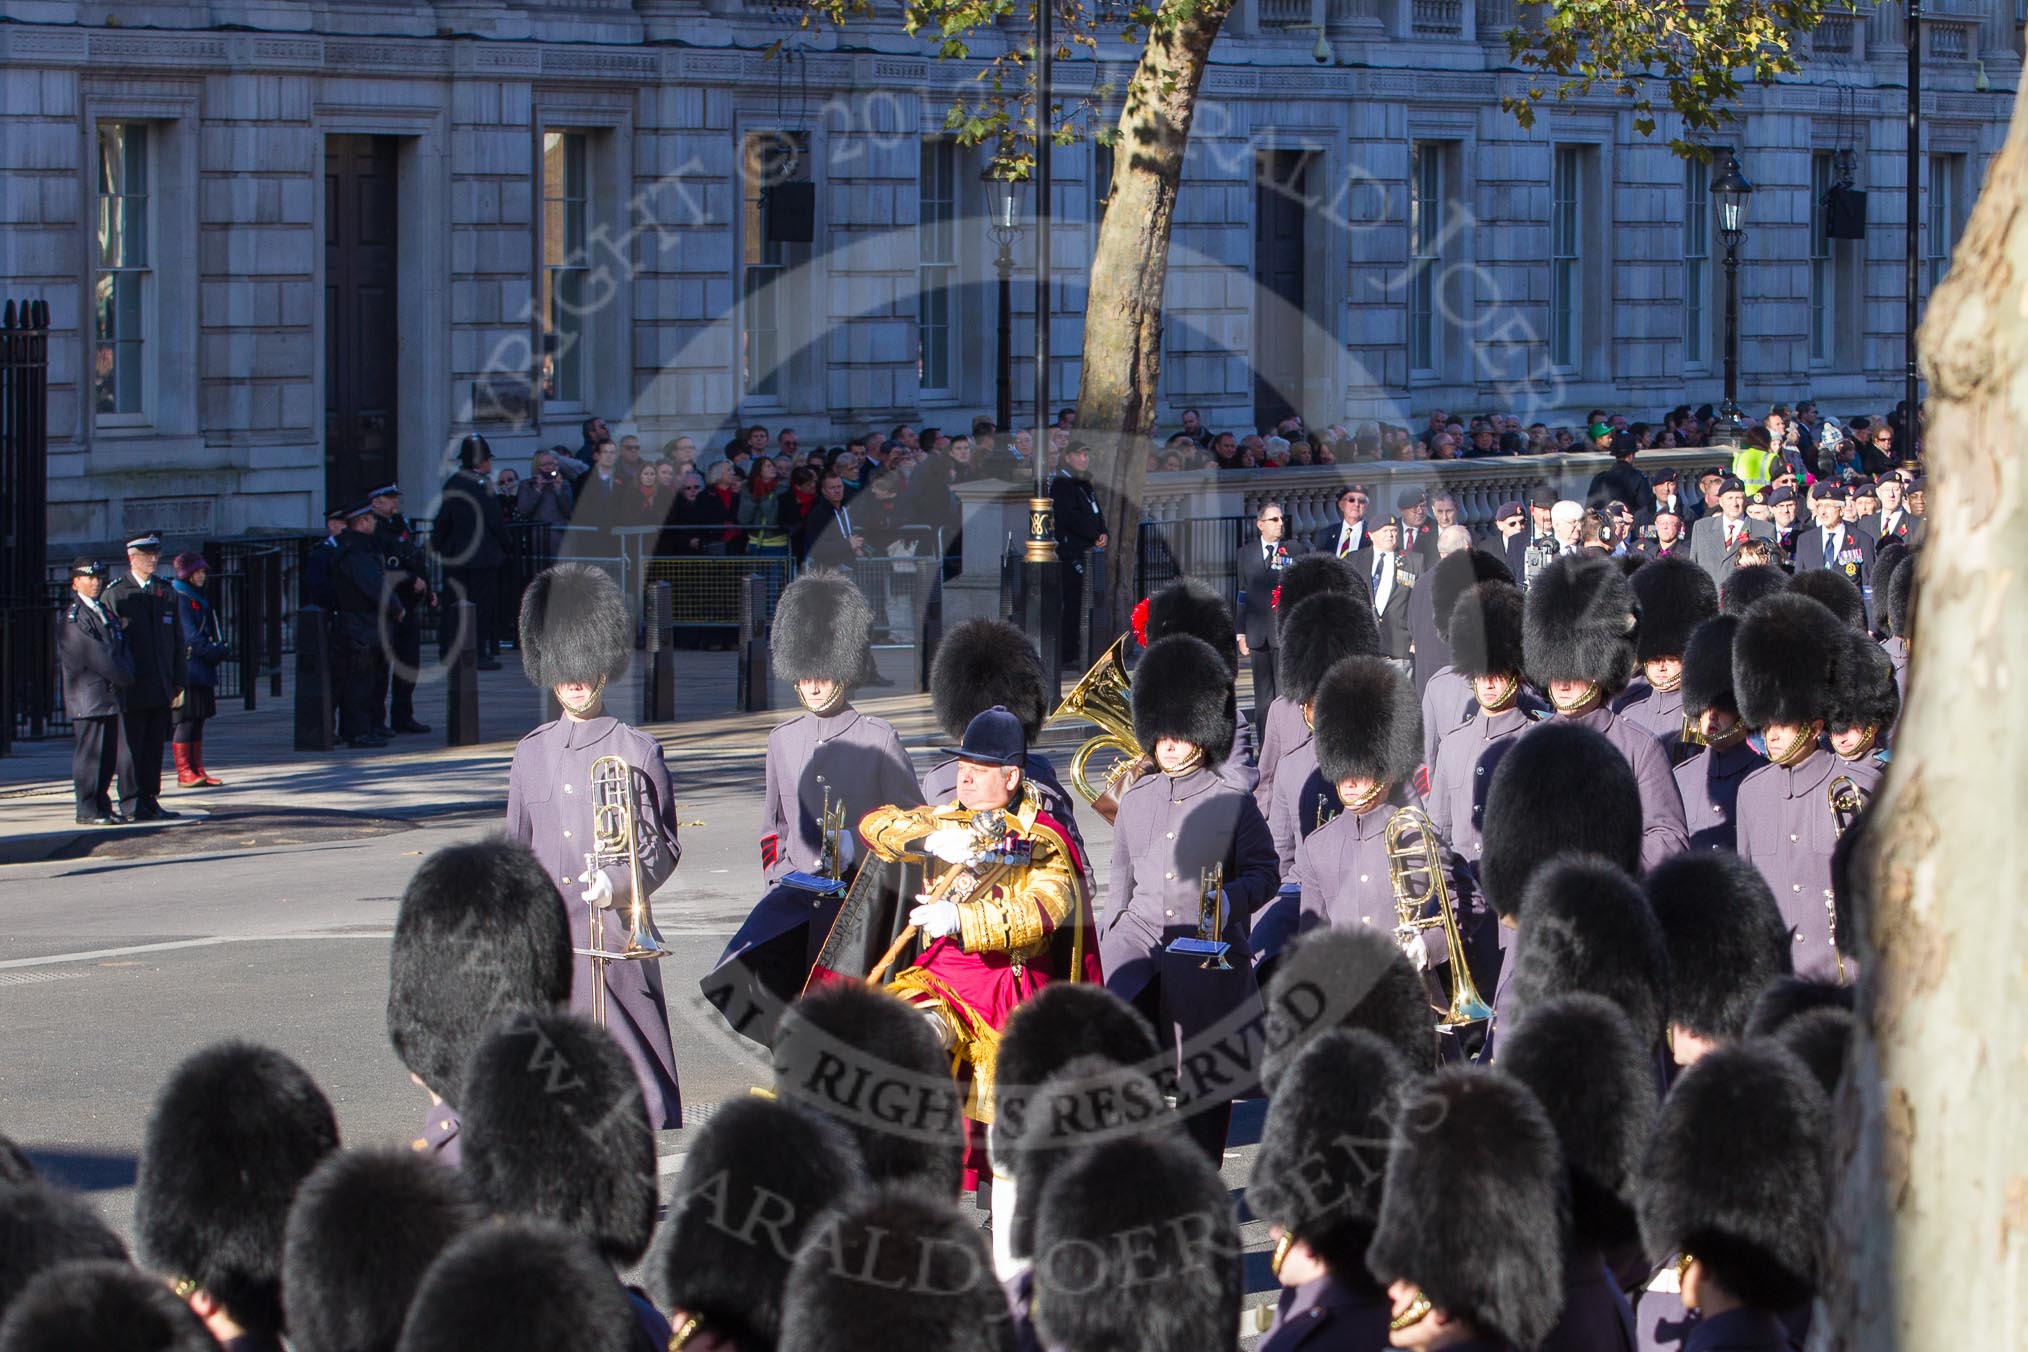 Remembrance Sunday 2012 Cenotaph March Past: One of the Massed Bands, with Drum Major Stephen Staite, Grenadier Guards, in the lead, marches forward..
Whitehall, Cenotaph,
London SW1,

United Kingdom,
on 11 November 2012 at 11:53, image #761